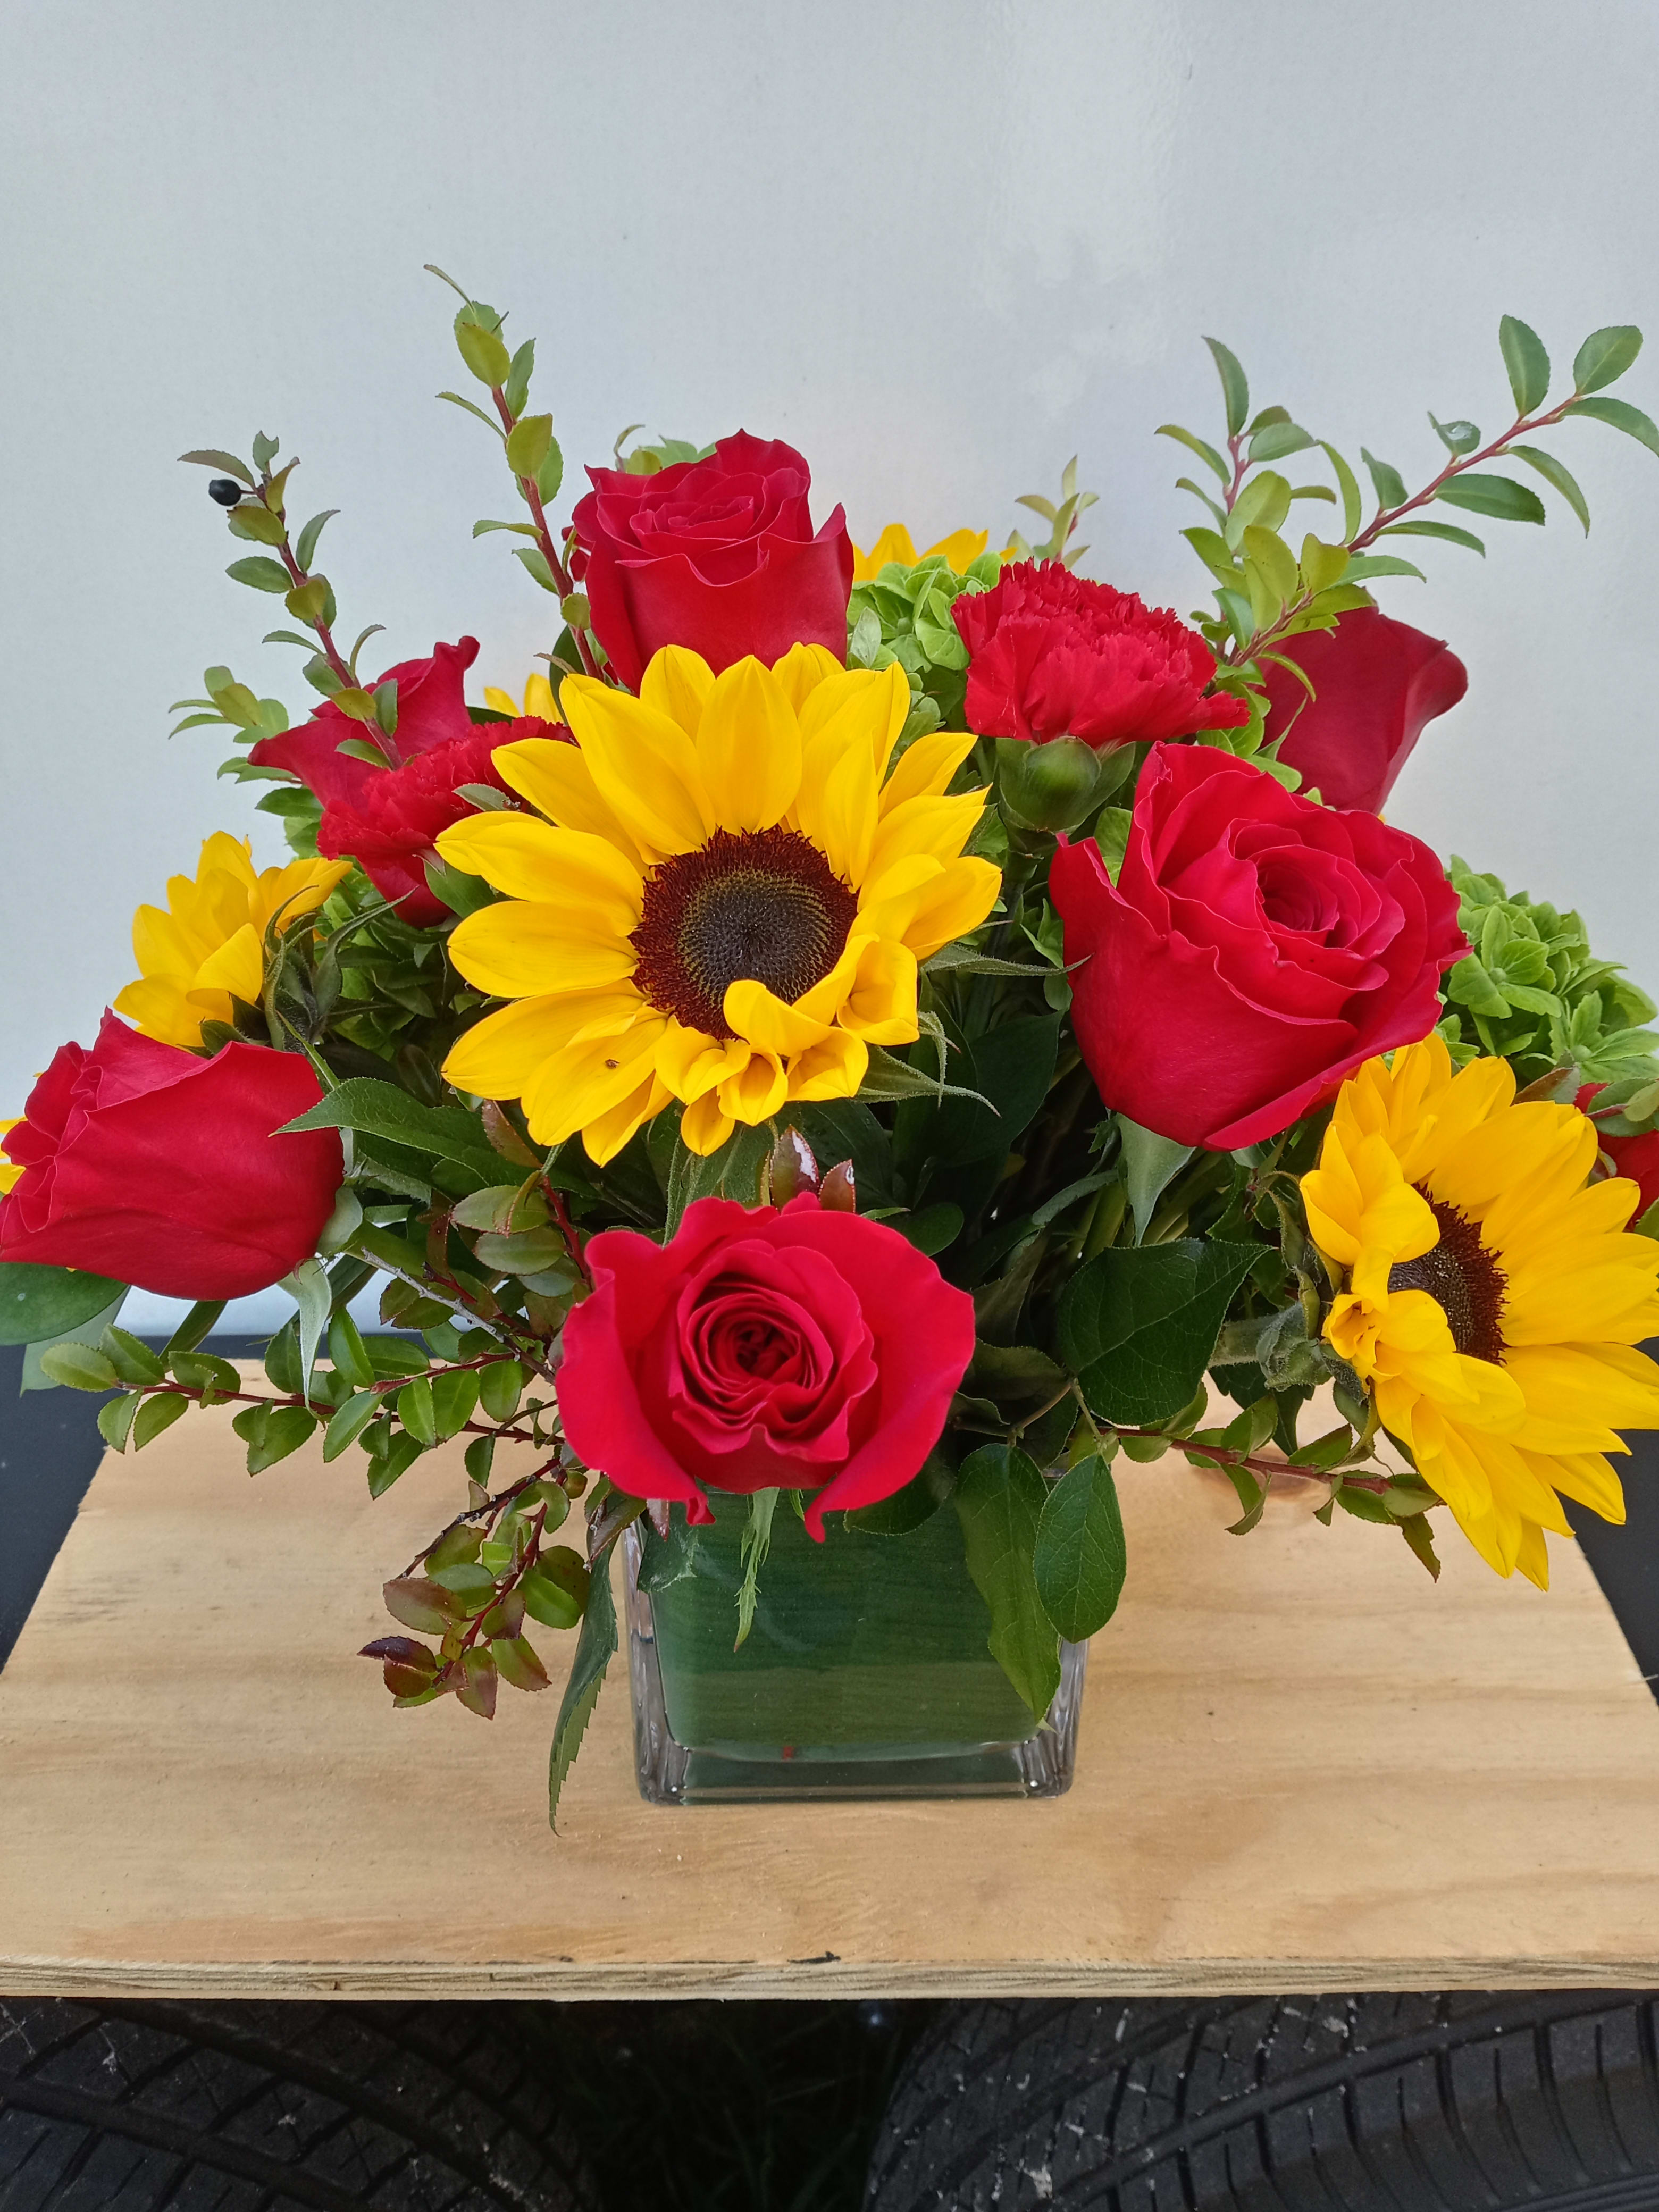 Sunflowers and roses - Sunflowers, red roses, carnations and green hydrangea arranged in a 5 &quot;x 5&quot; glass cube.